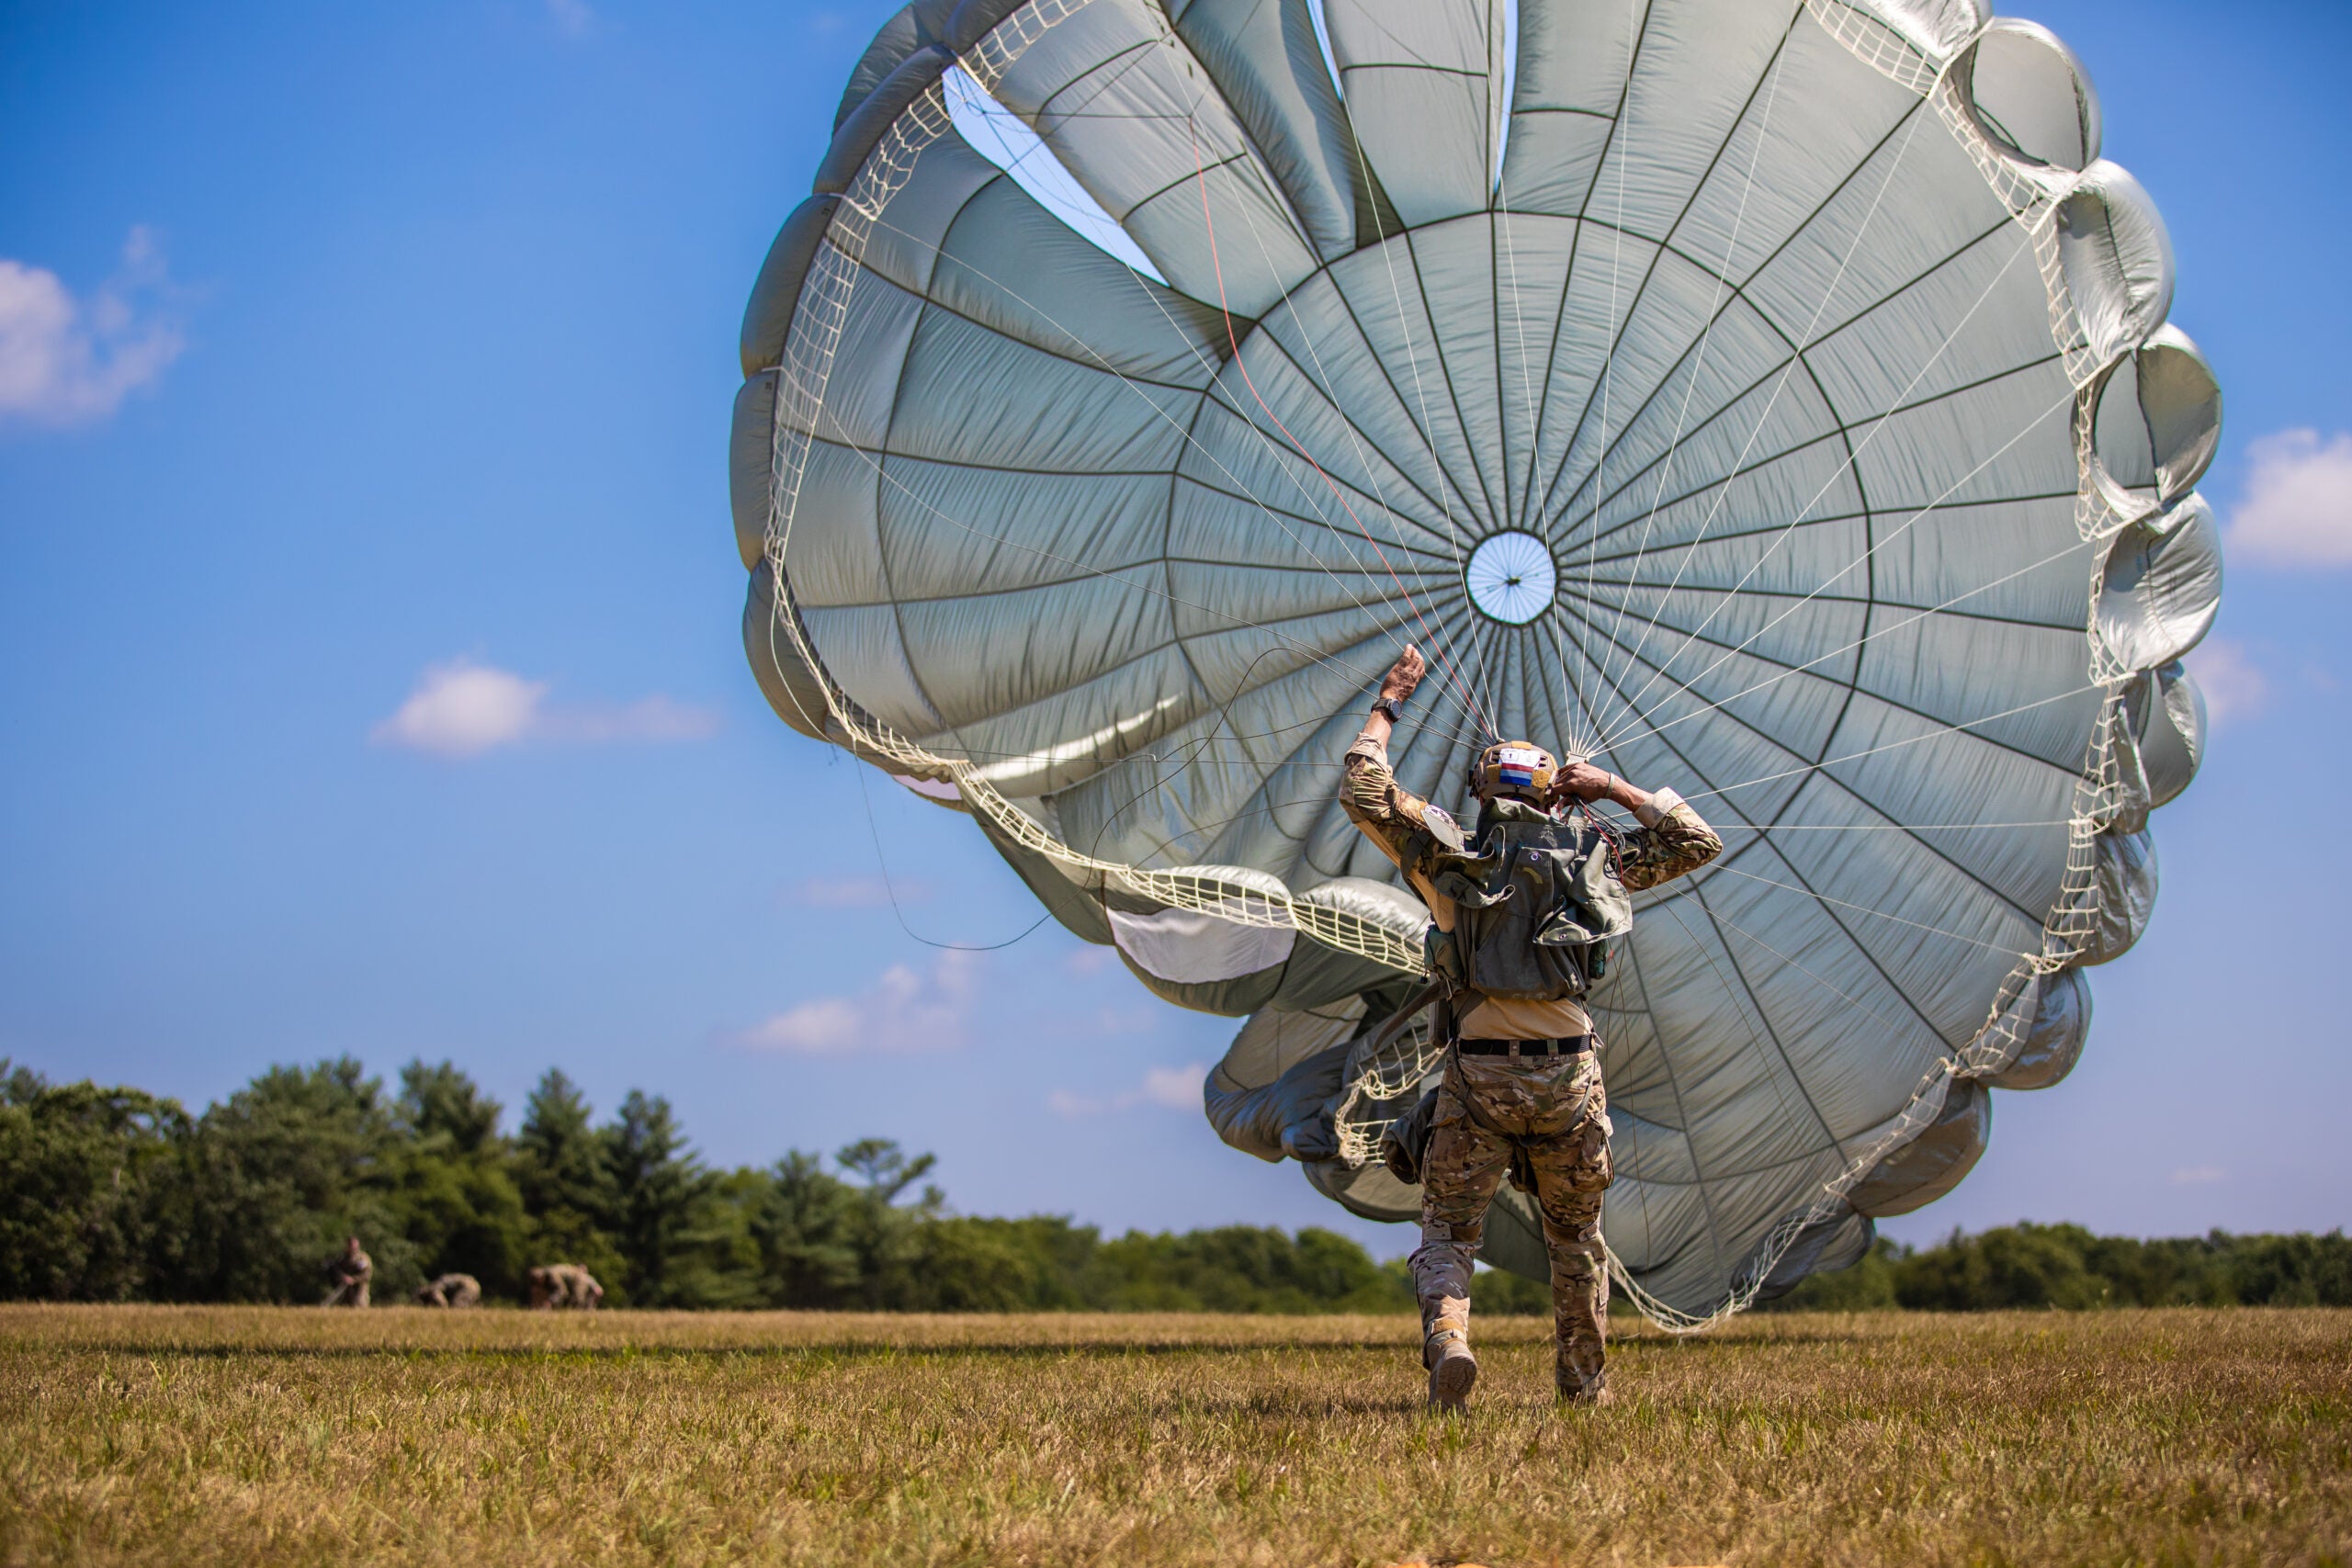 A Dutch Paratrooper drags his MC-6 parachute towards the objective on Glen Rock Drop Zone during Leapfest 2022 at Exeter, Rhode Island, August 6, 2022. Leapfest is the largest, longest standing, international static line parachute training event and competition hosted by the 56th Troop Command, Rhode Island Army National Guard to promote high level technical training and esprit de corps within the International Airborne community. (U.S. Army Reserve photo by Sgt. Eric Kestner)